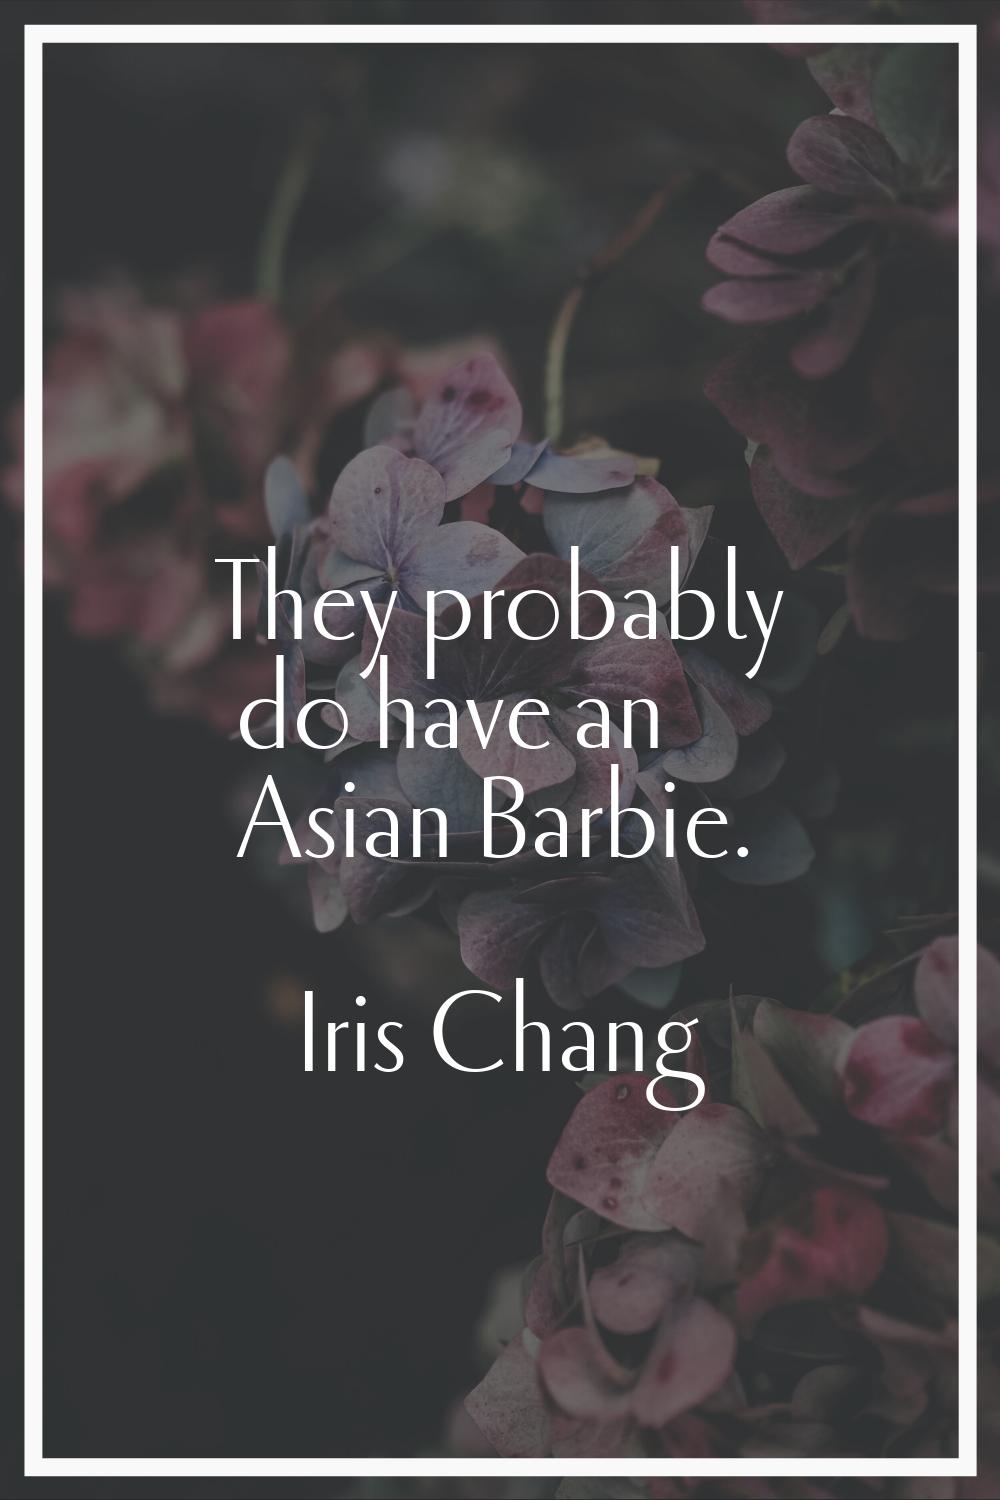 They probably do have an Asian Barbie.